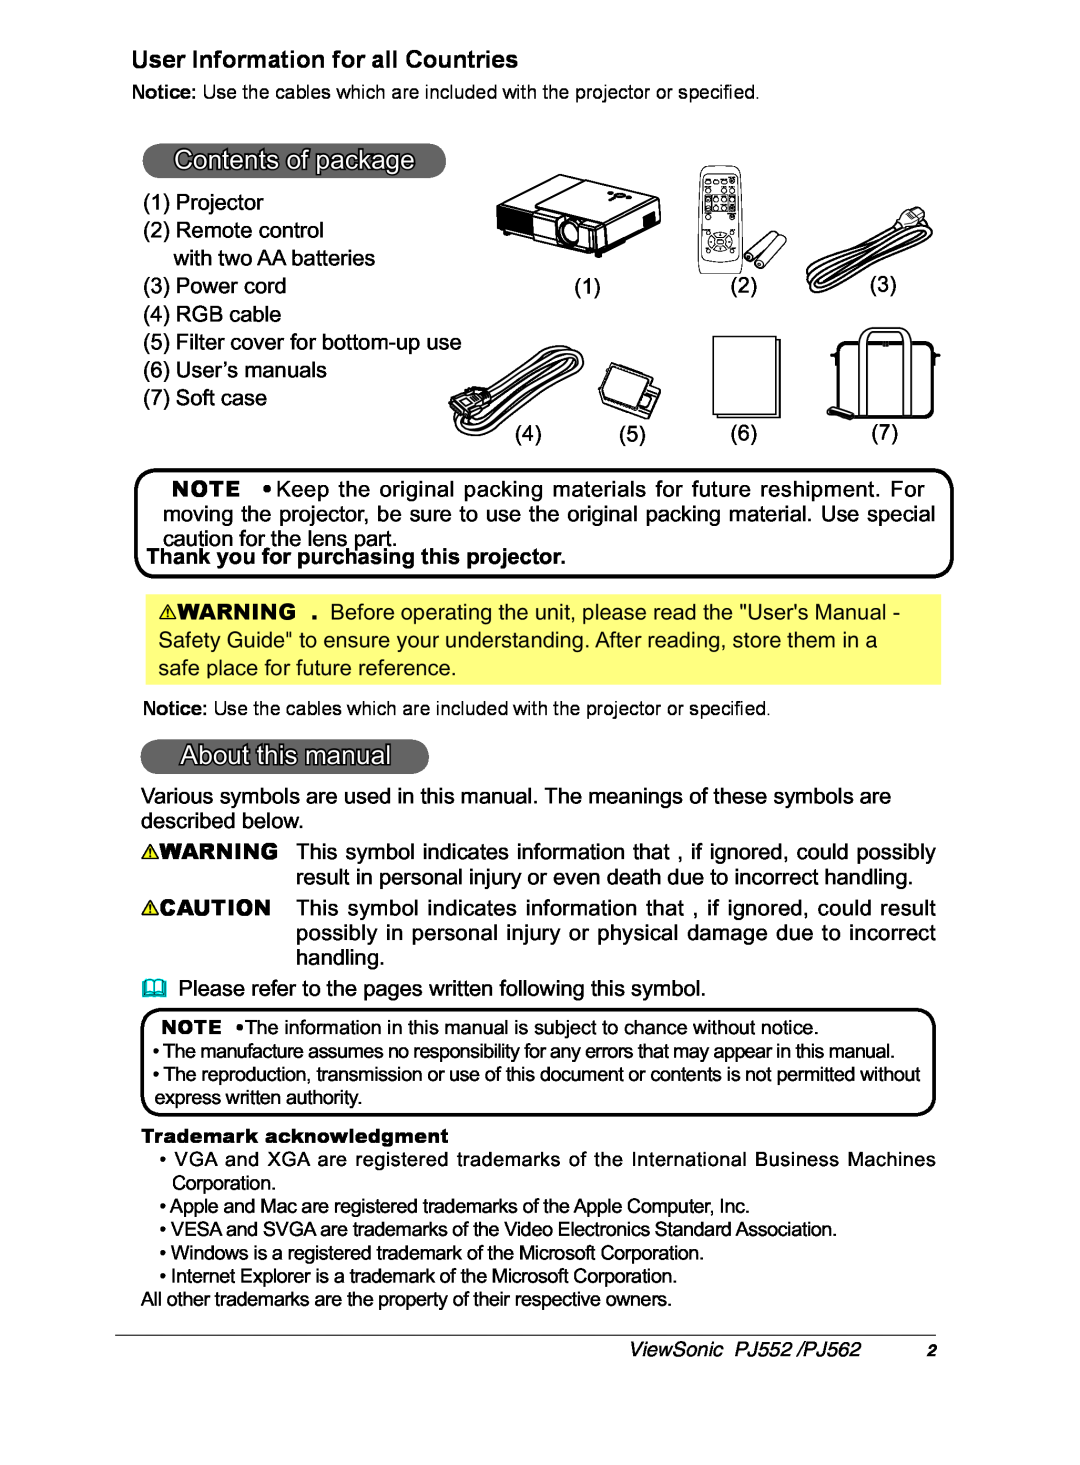 ViewSonic PJ562 manual Contents of package, $ErxwWklvPdqxdo, User Information for all Countries 